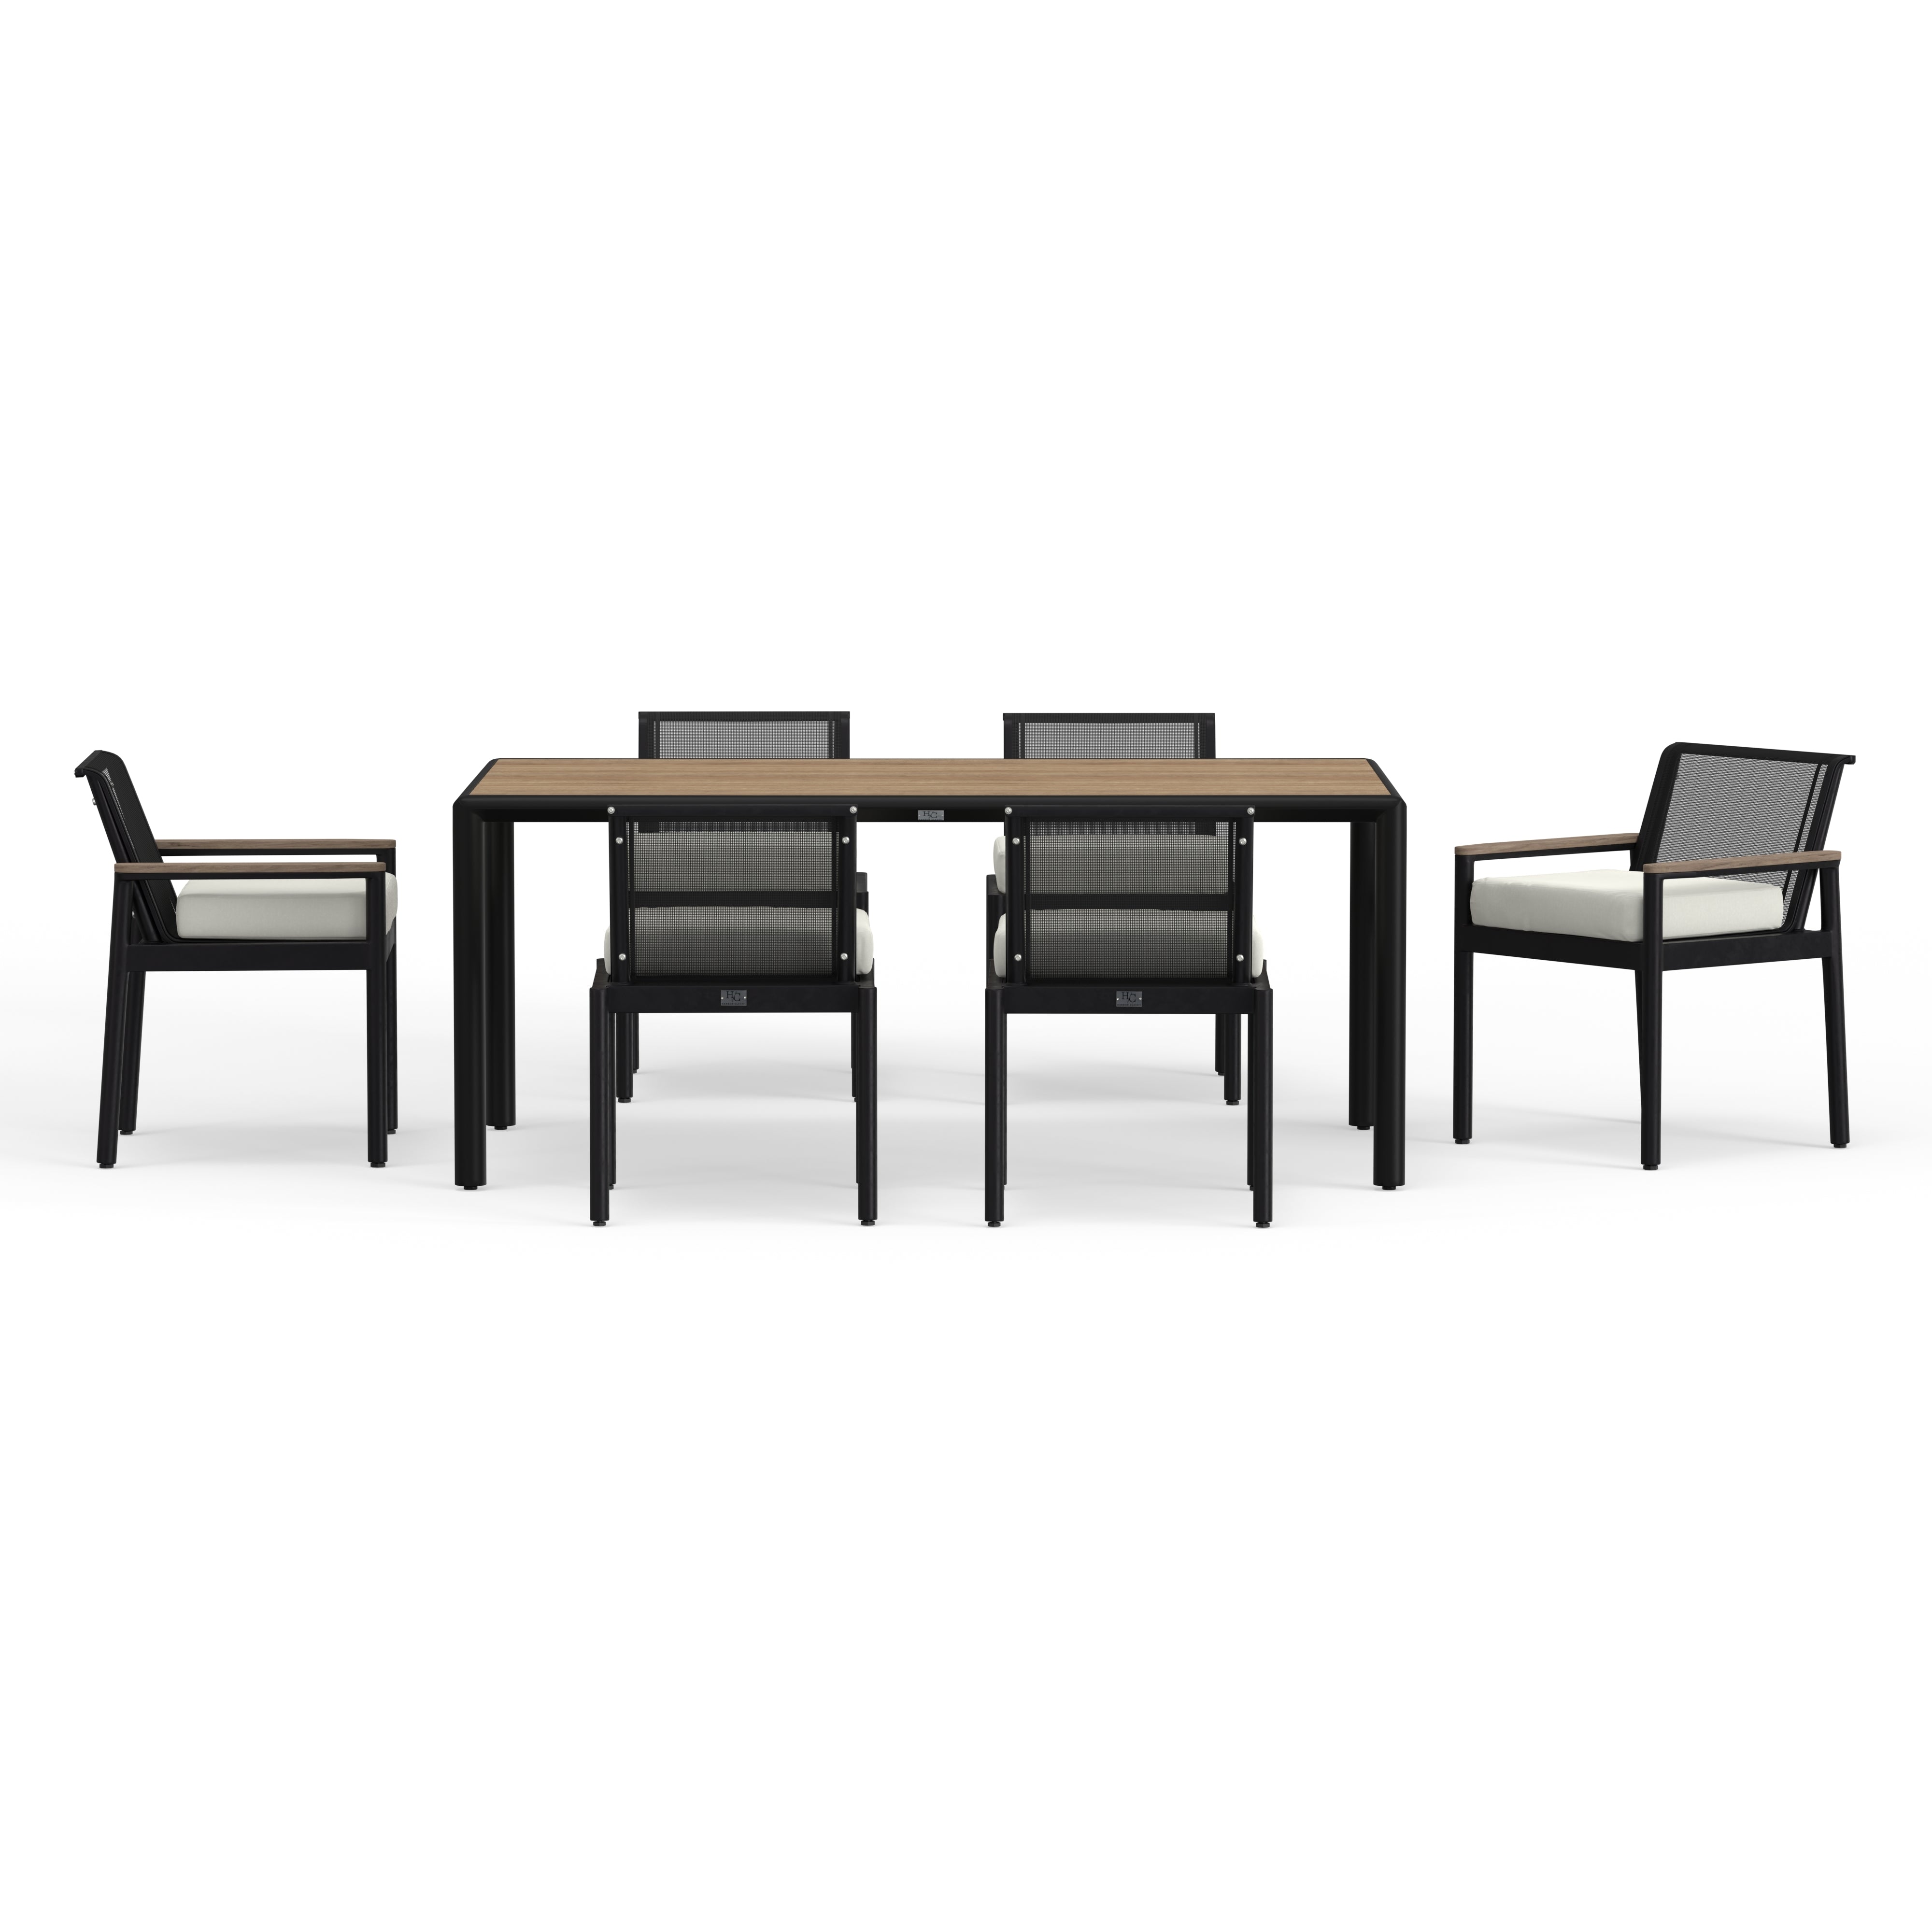 Contemporary Black Dining Outdoor Chairs